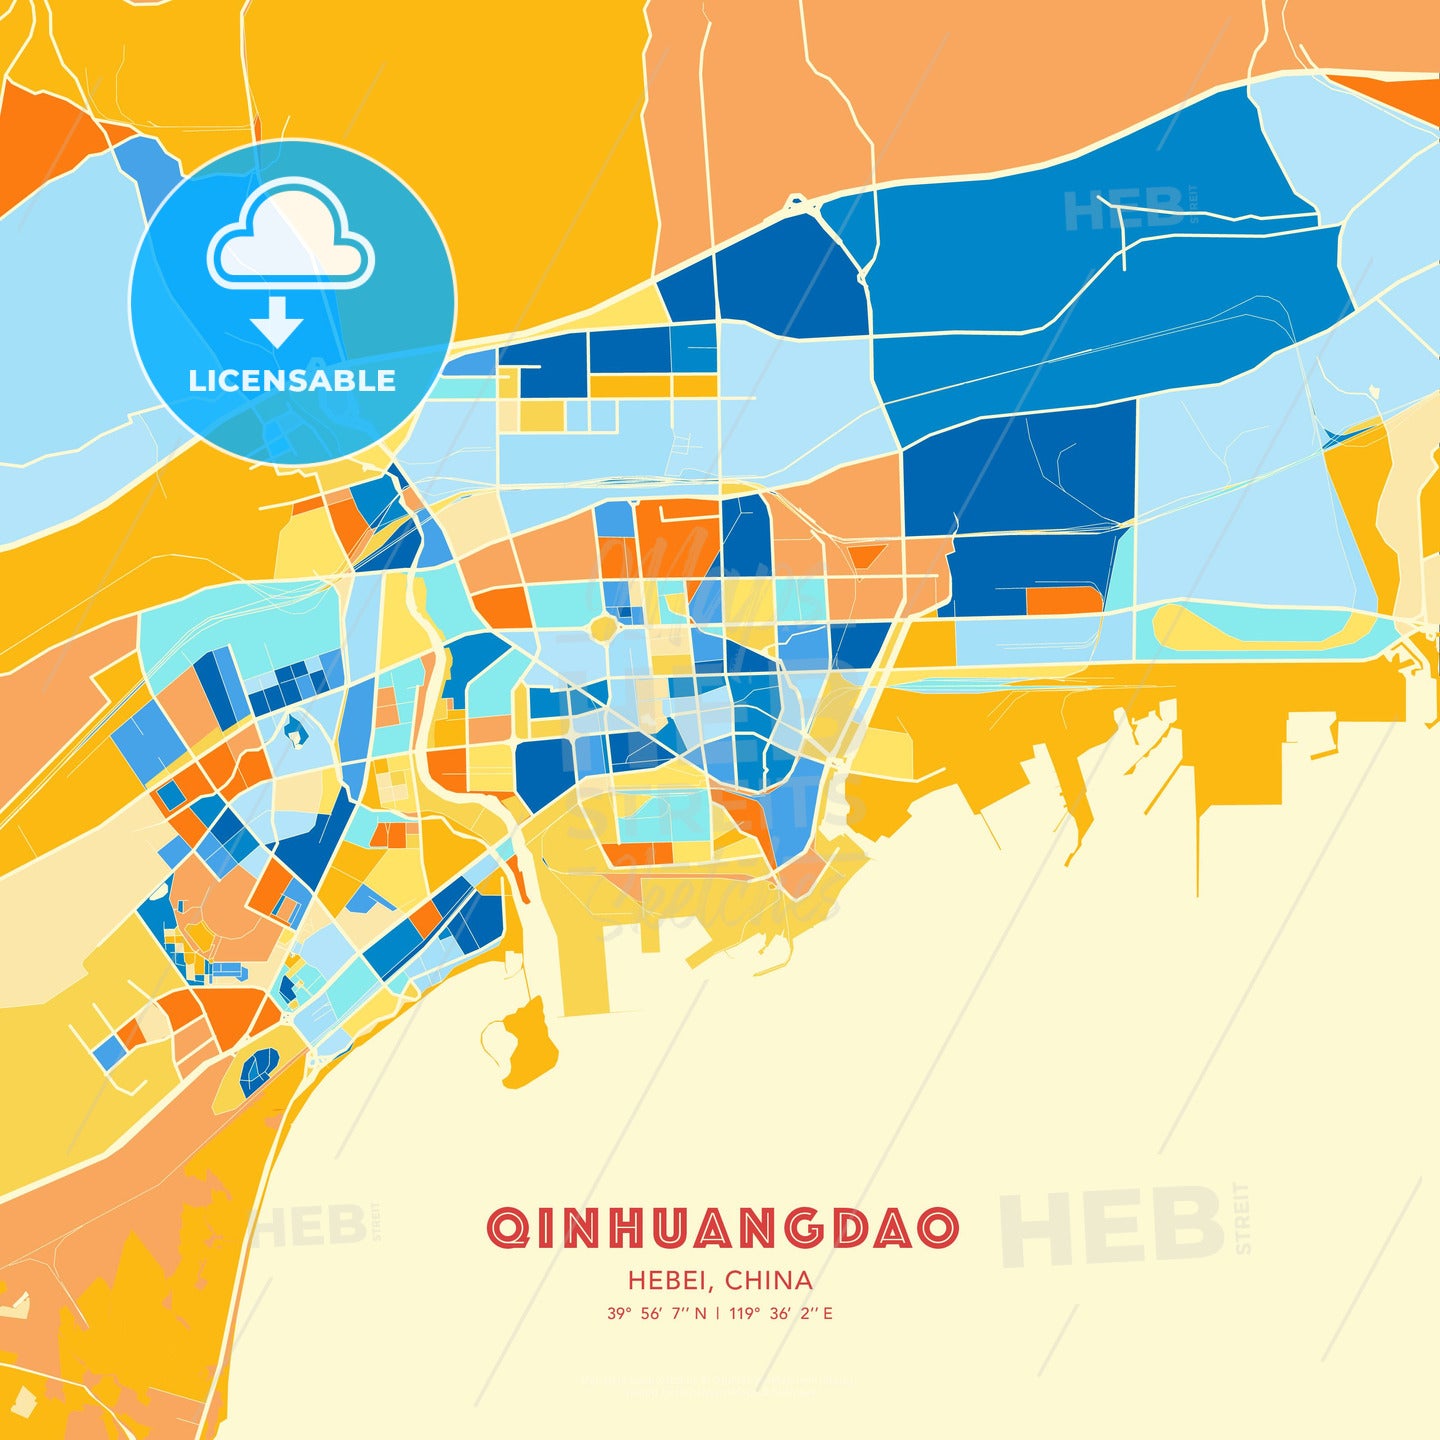 Qinhuangdao, Hebei, China, map - HEBSTREITS Sketches